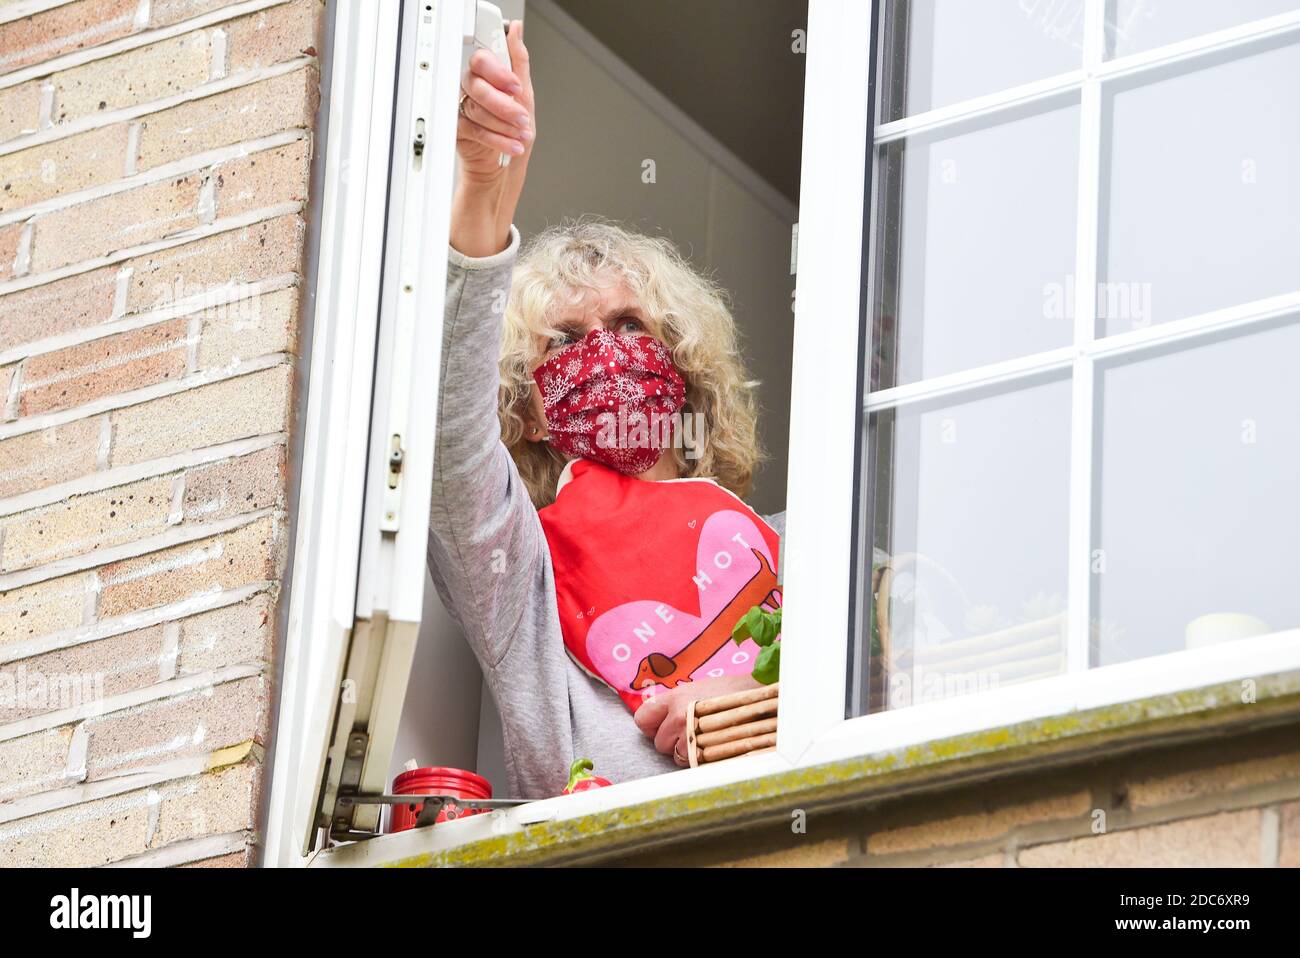 Woman holding a hot water bottle and wearing a face covering at home opening kitchen window to let in fresh air as advised to help combat coronavirus Stock Photo